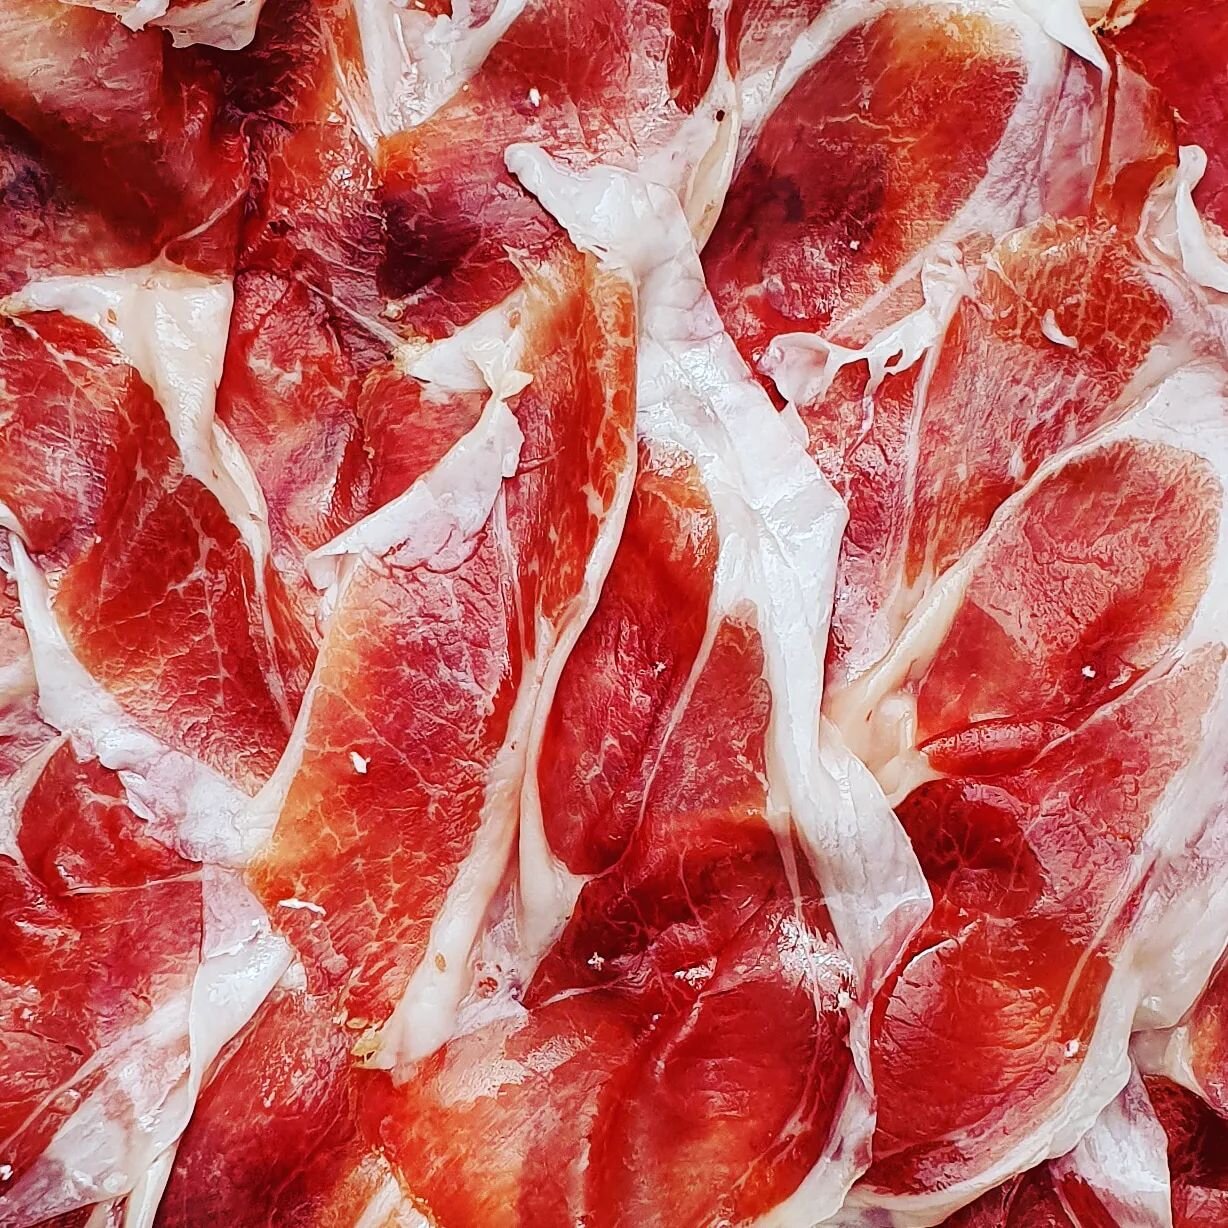 British ham rocks ! And we have manglalitsa air dried ham available as part of our selection boxes, DIY platter kits and in our cured meat deli right now so head on over and try one of the best from @bealsfarmcharcuterie 

#britishcharcuterie #mangal